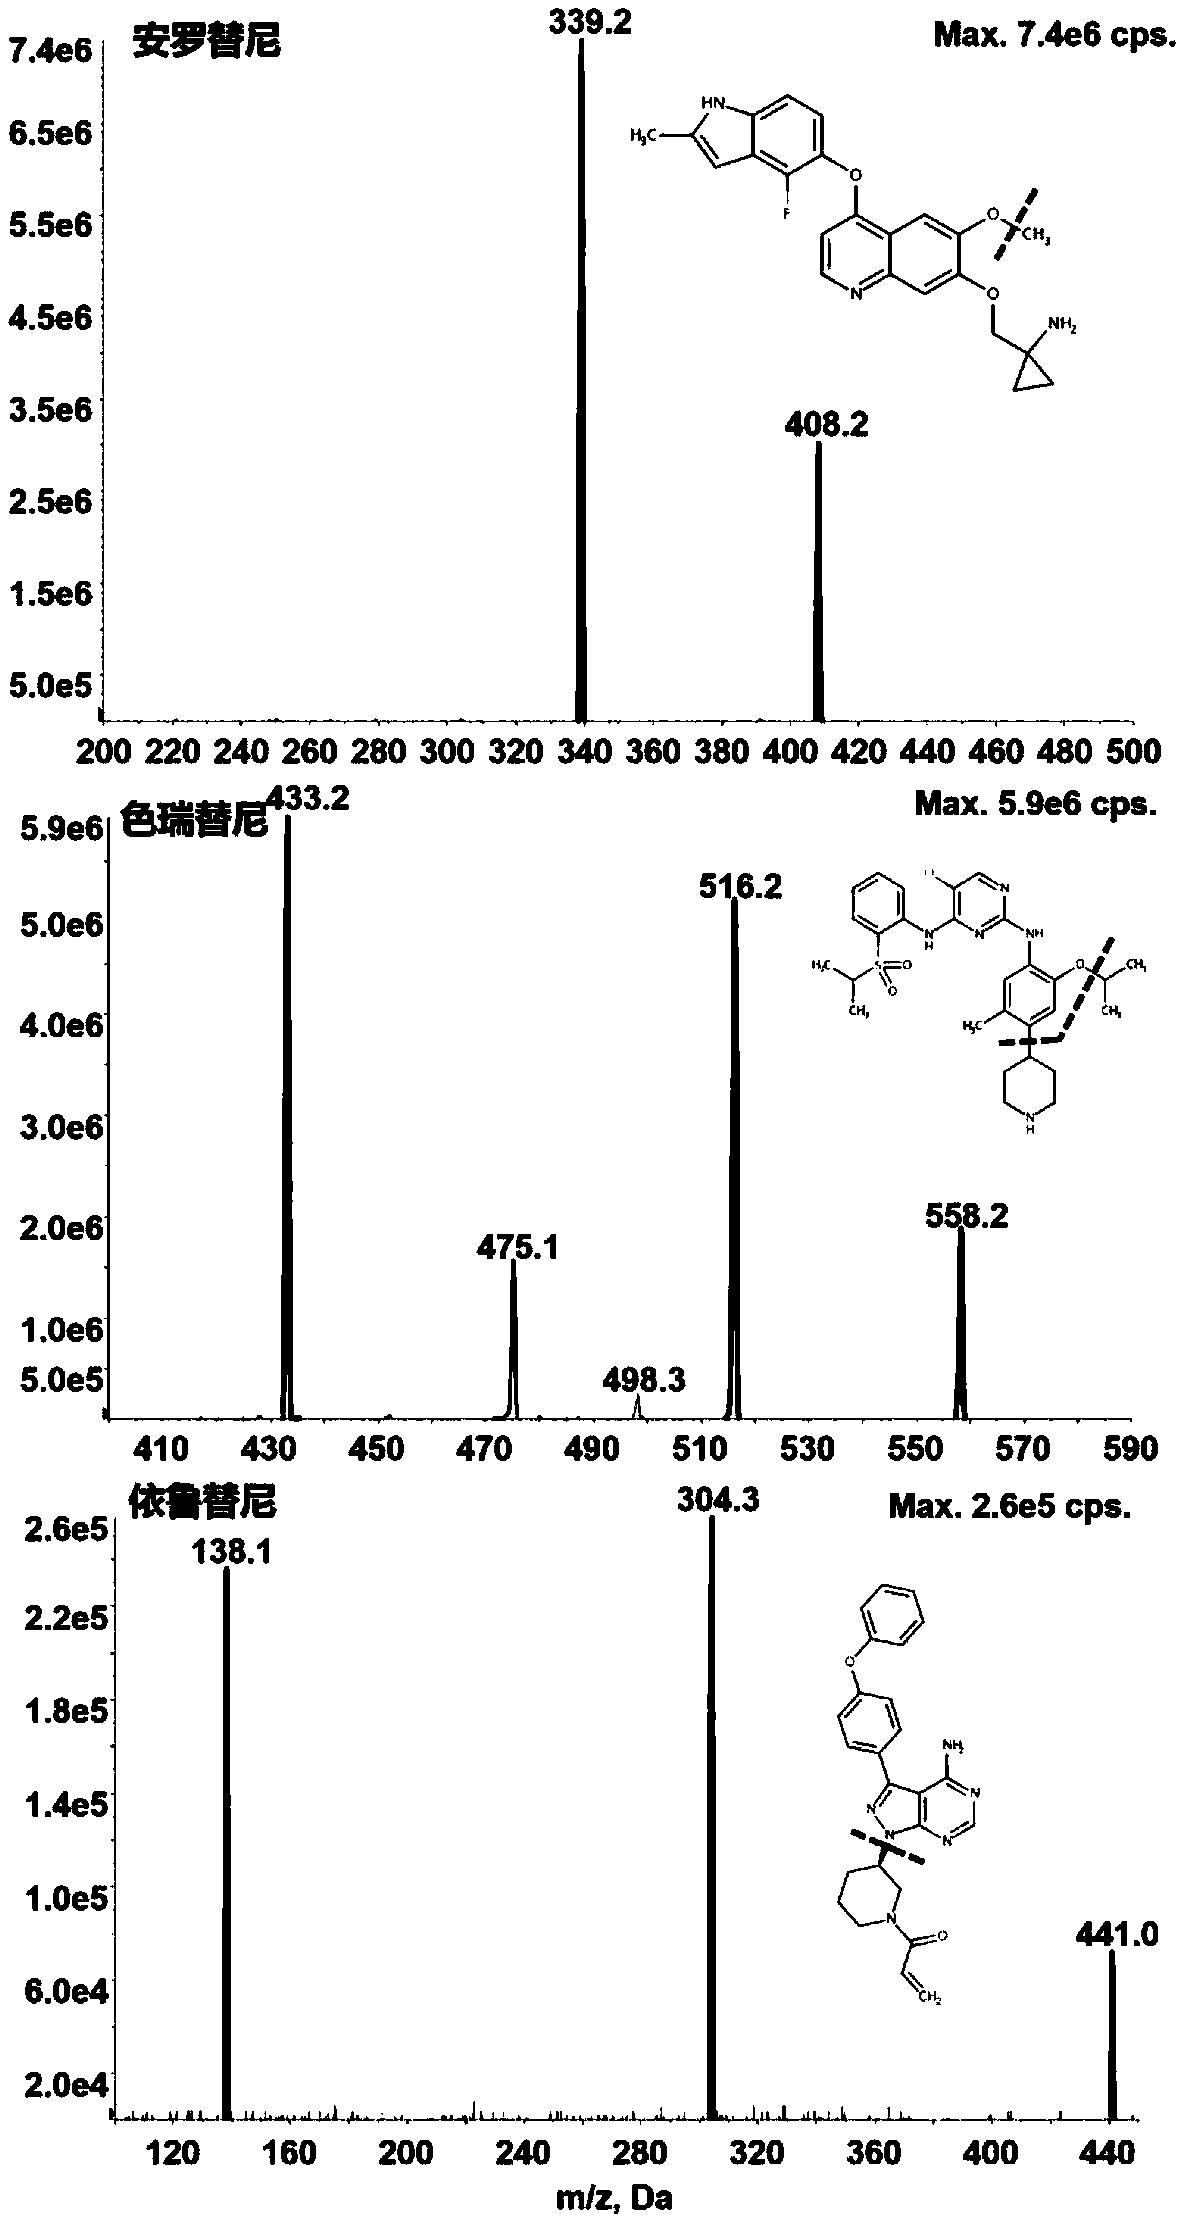 Method for measuring concentration of molecular targeted drugs in plasma by using ultra-high performance liquid chromatography tandem mass spectrometry